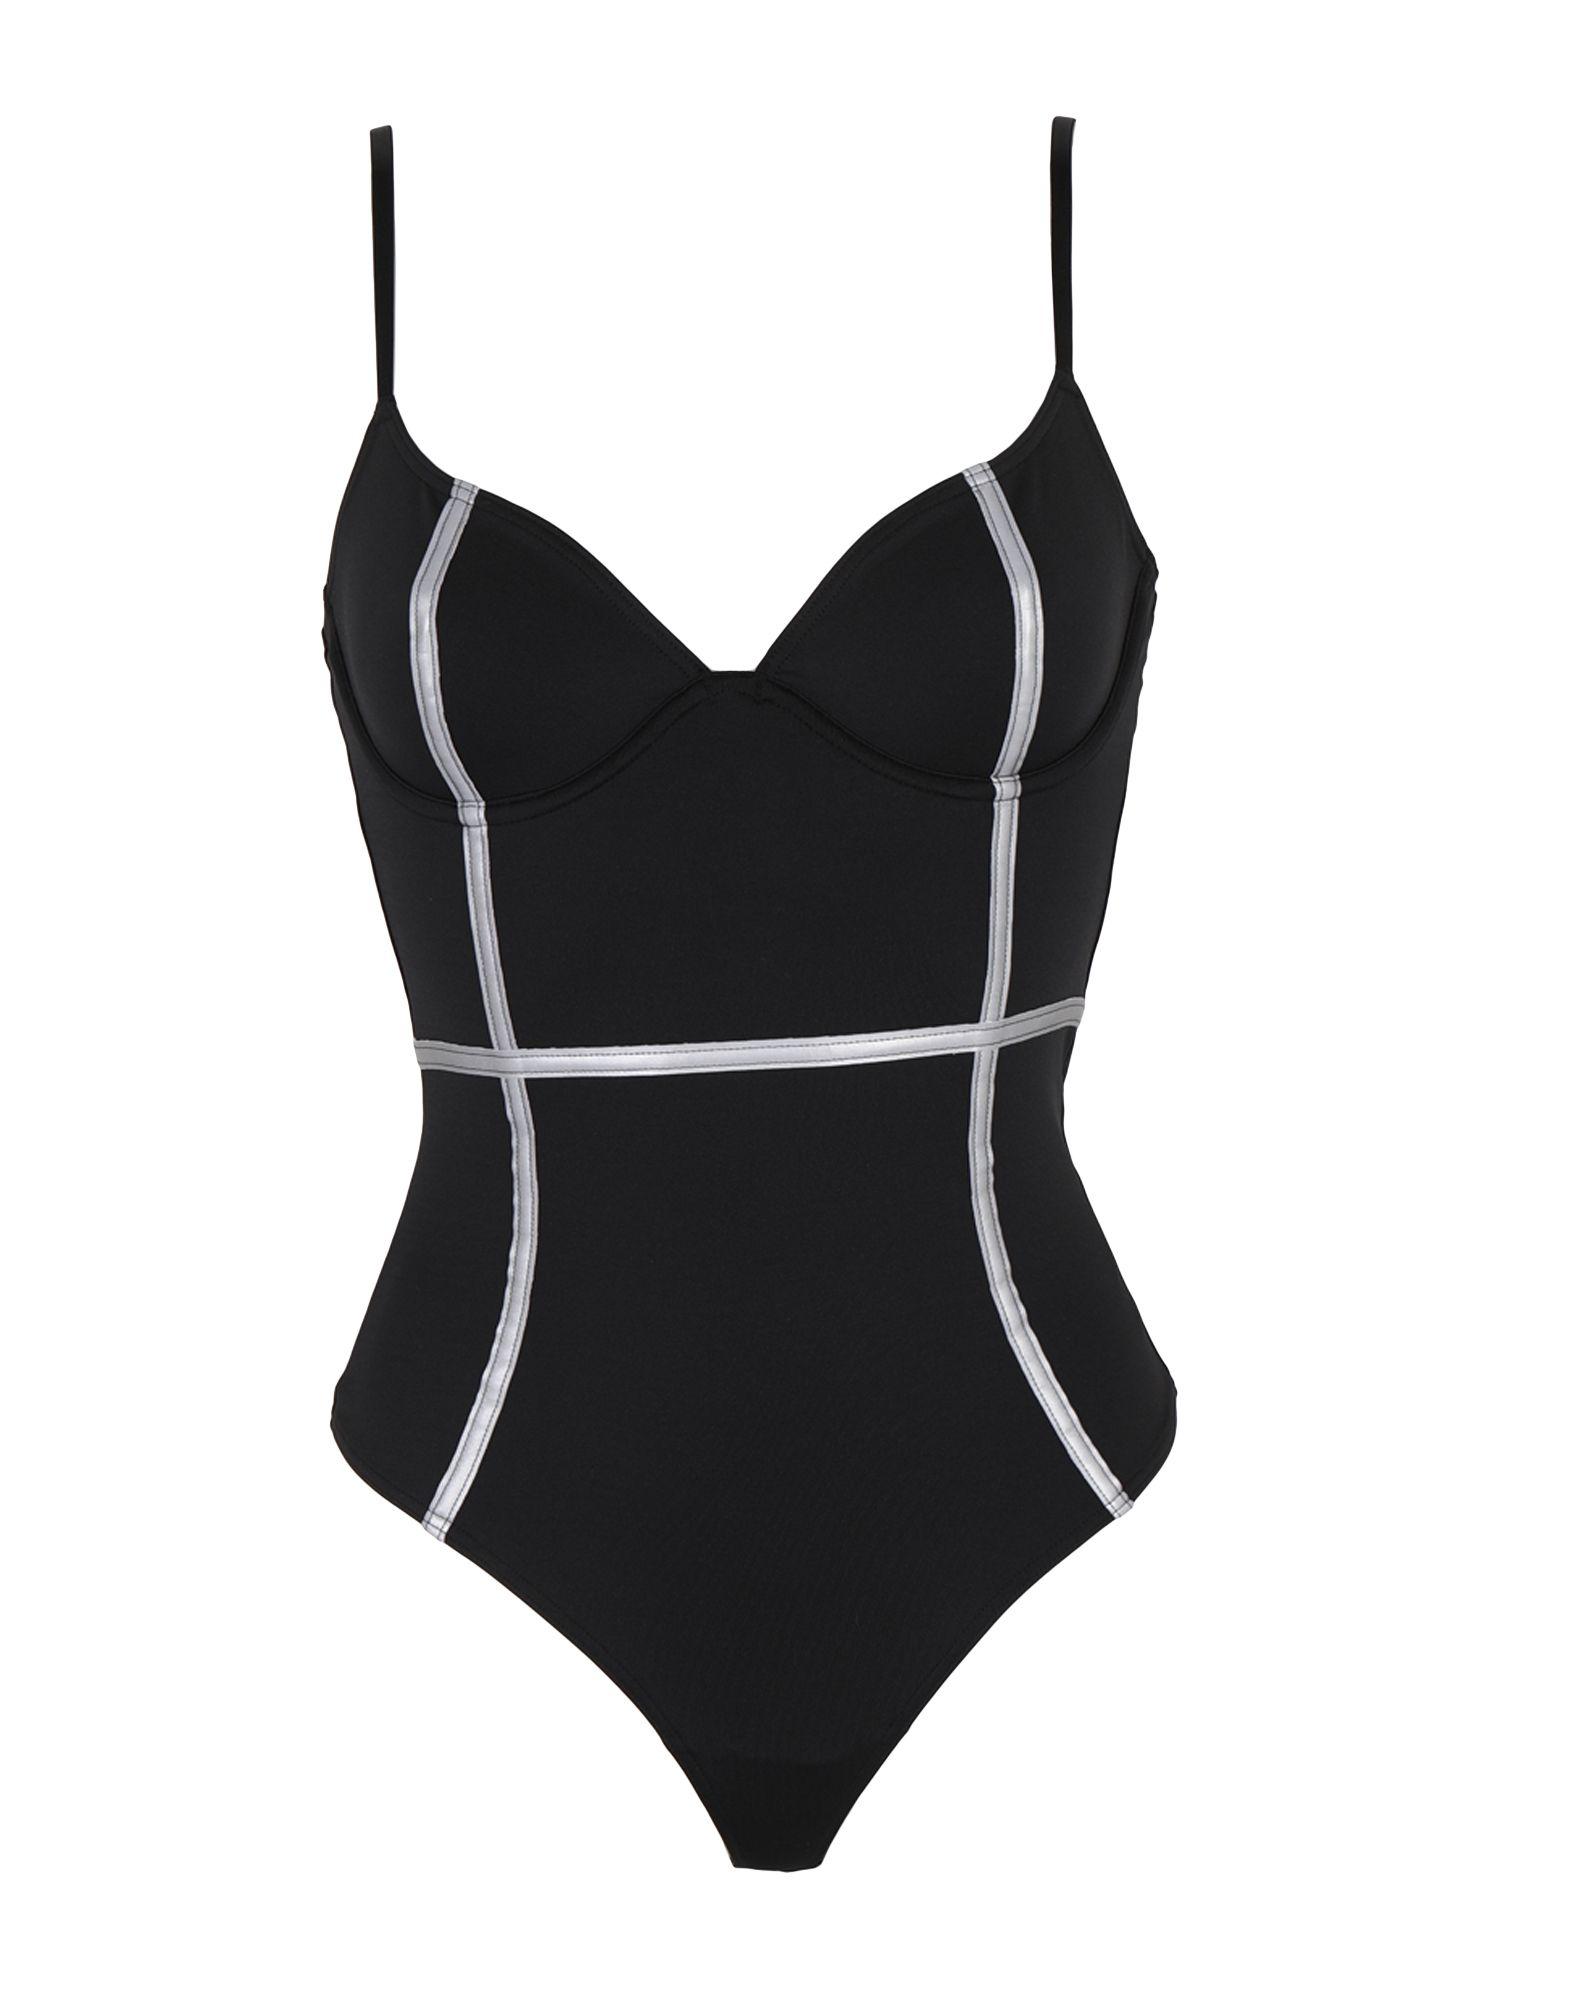 Ow Intimates Synthetic Bodysuit in Black - Lyst